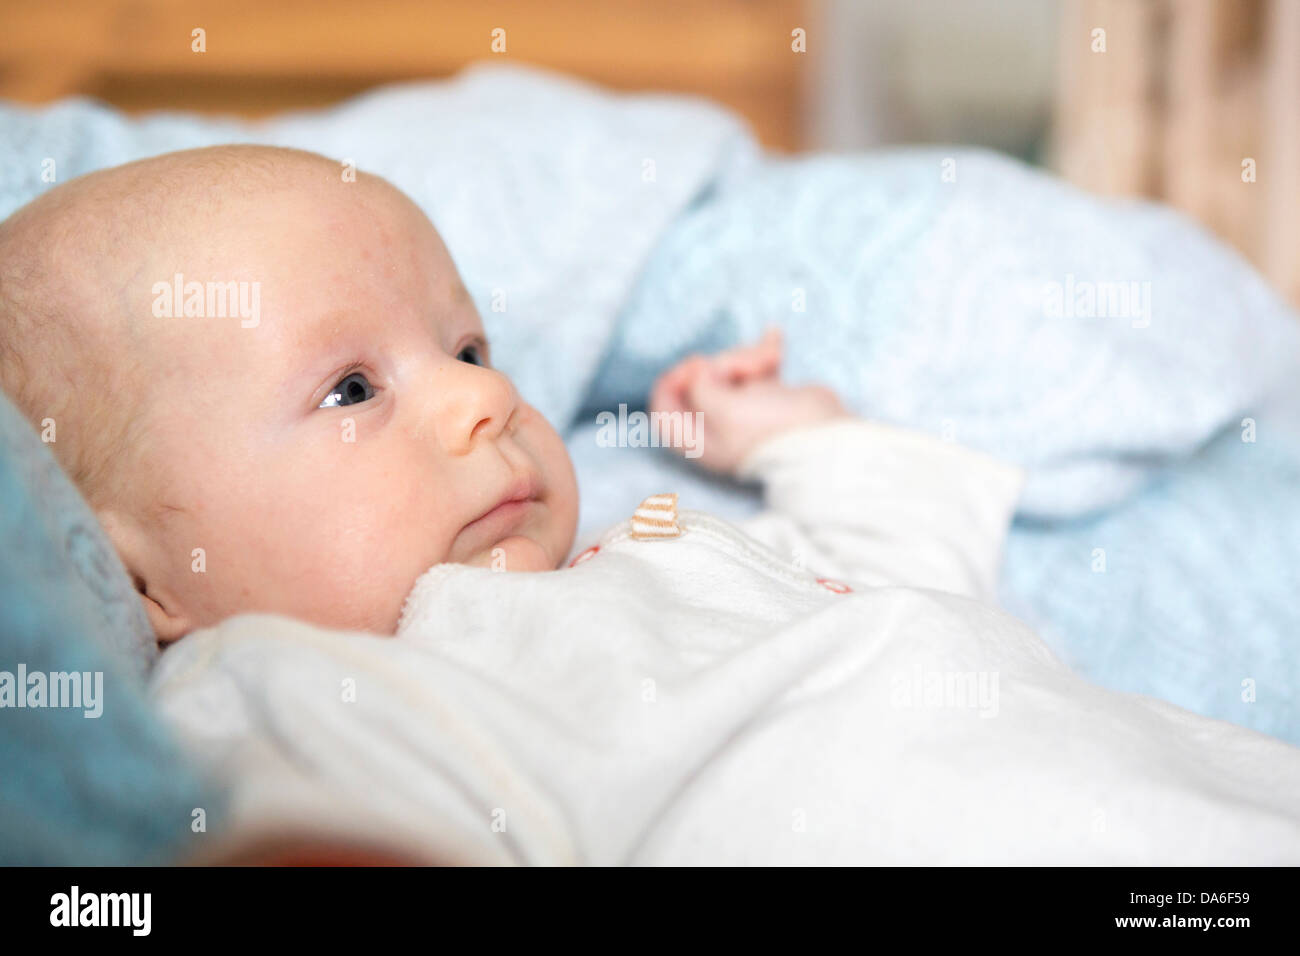 Baby, 2 months Stock Photo